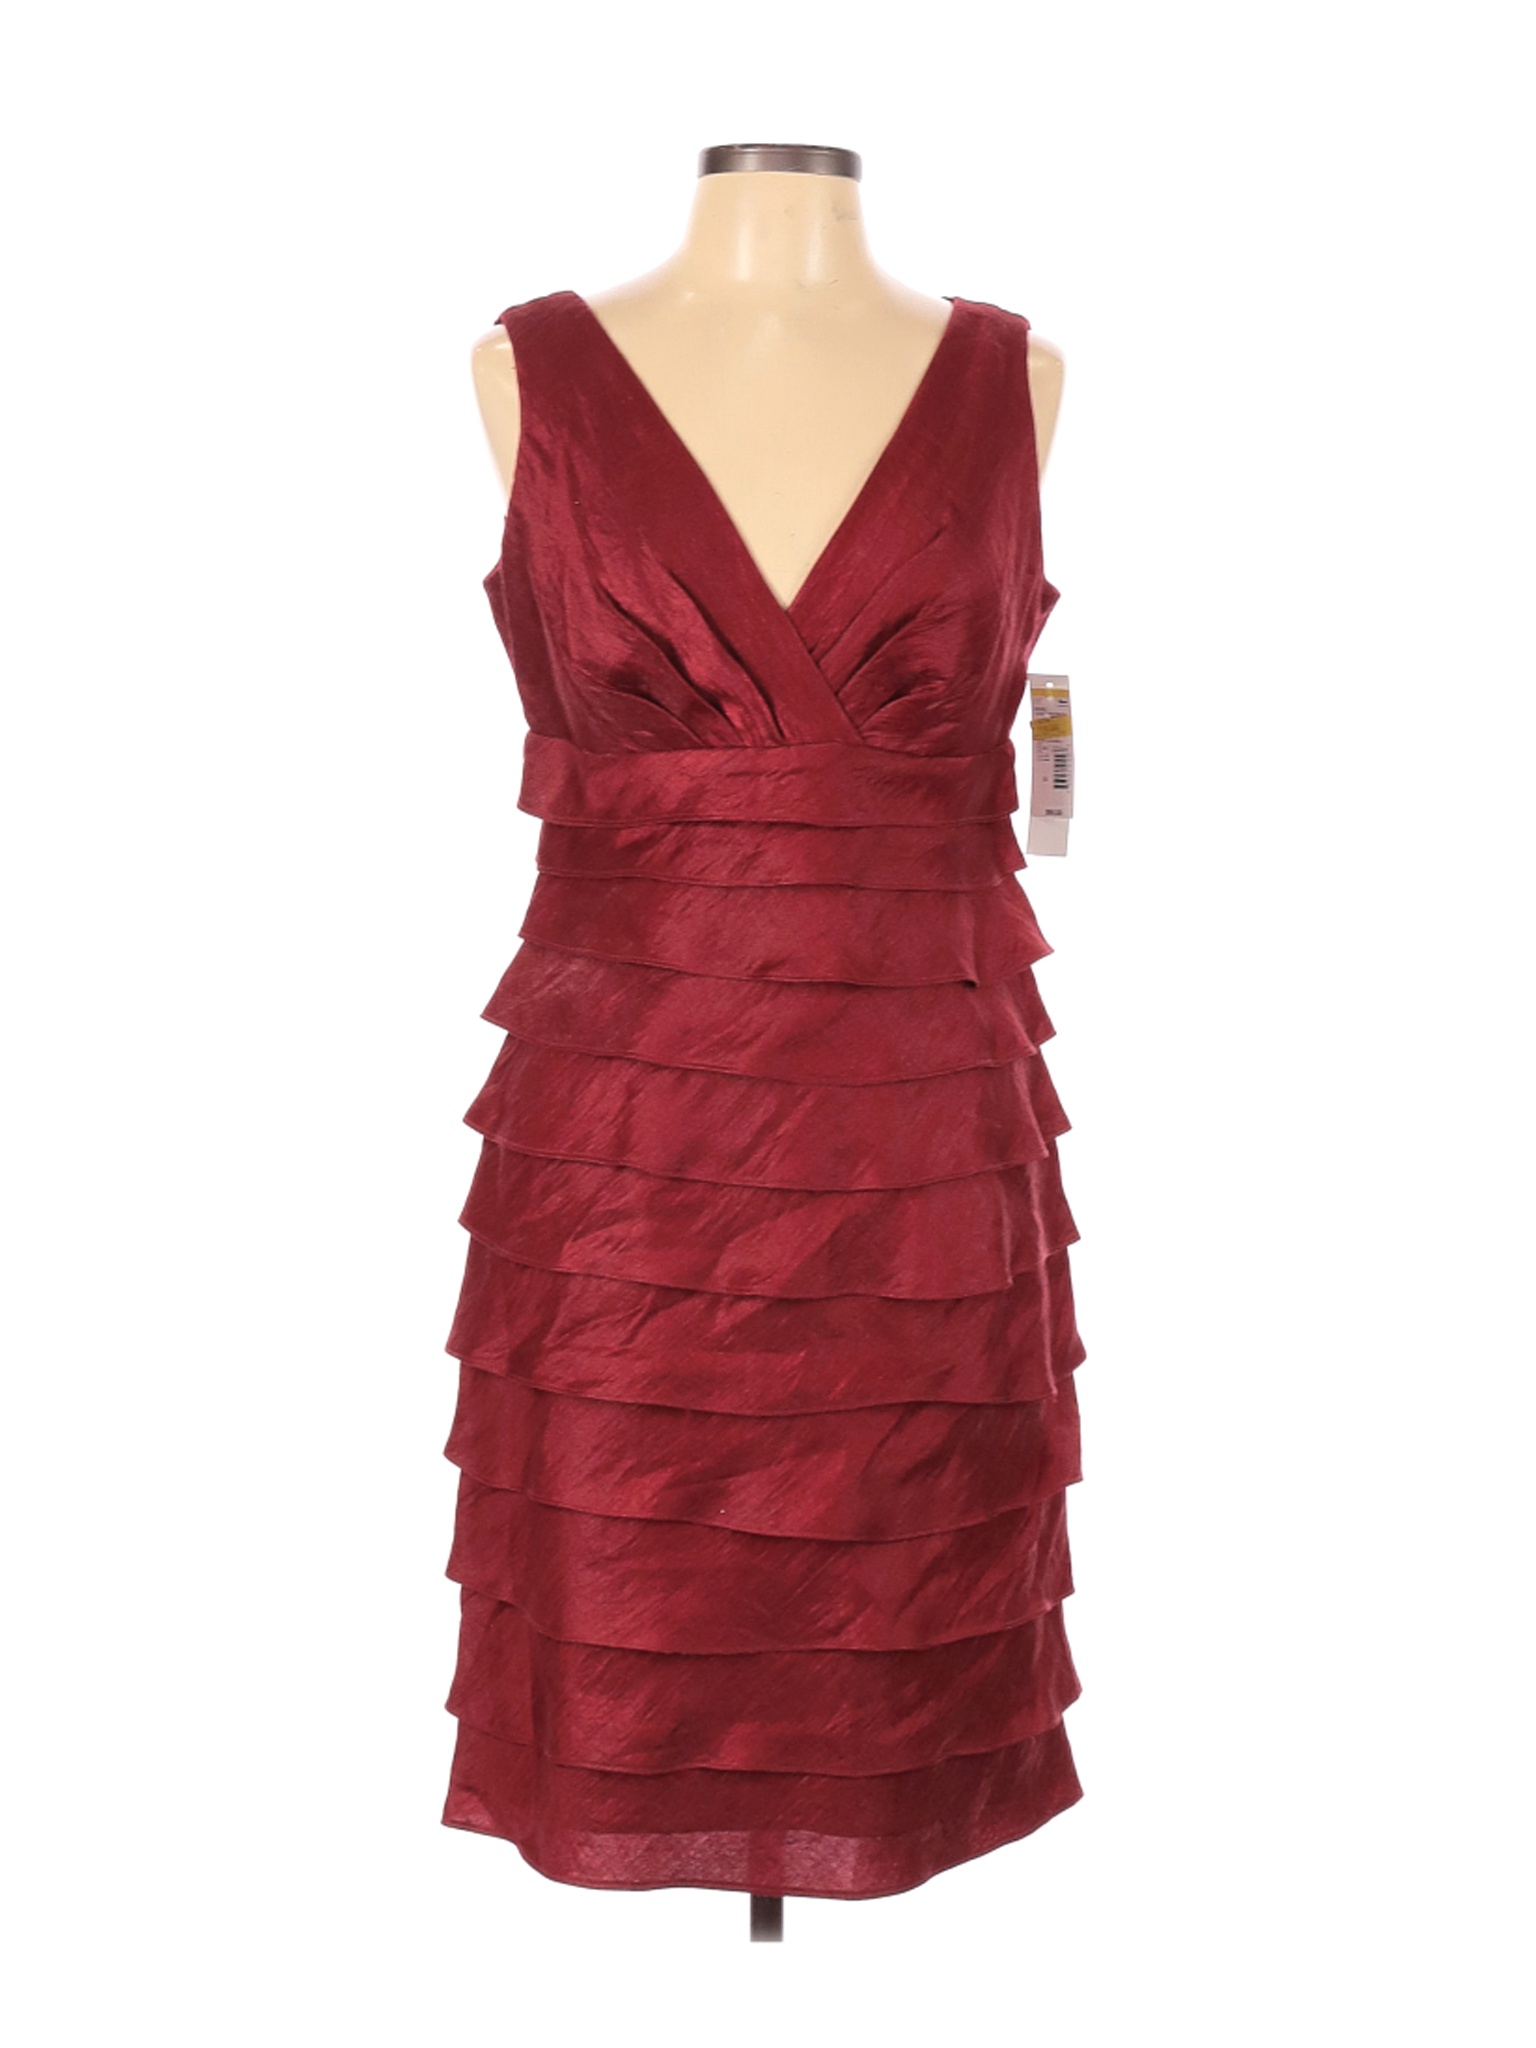 NWT London Style Women Red Cocktail Dress 12 | eBay